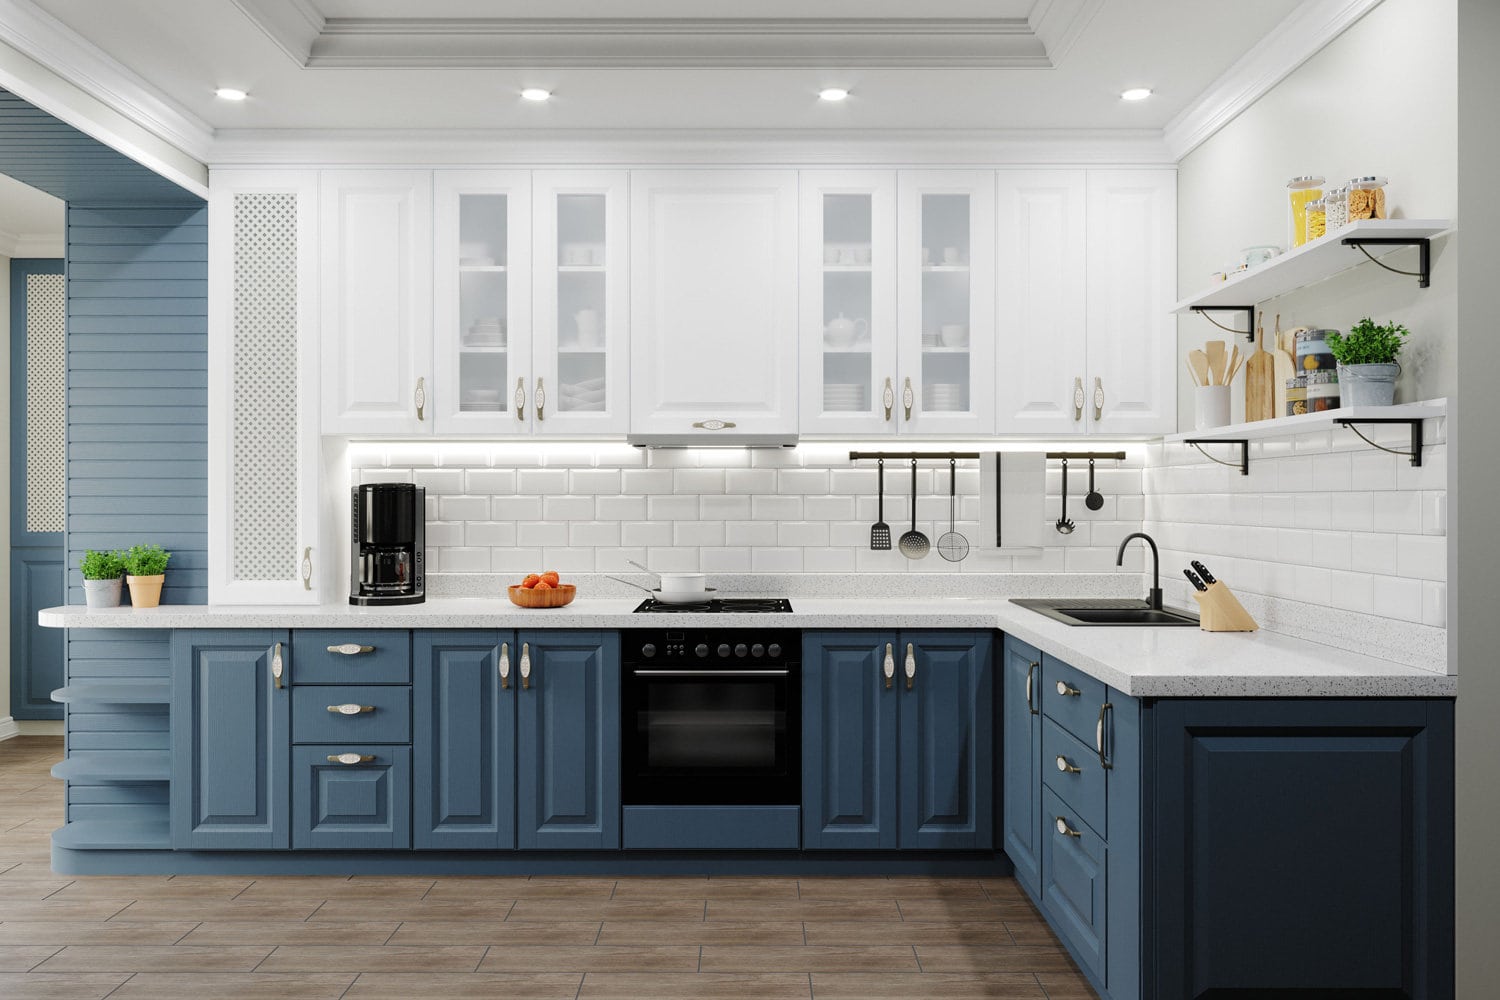 Kitchen in a modern style. Kitchen interior white top, blue bottom. Apron made of tiles for white brick. Corner work area, the kitchen has a coffee maker, dishes.